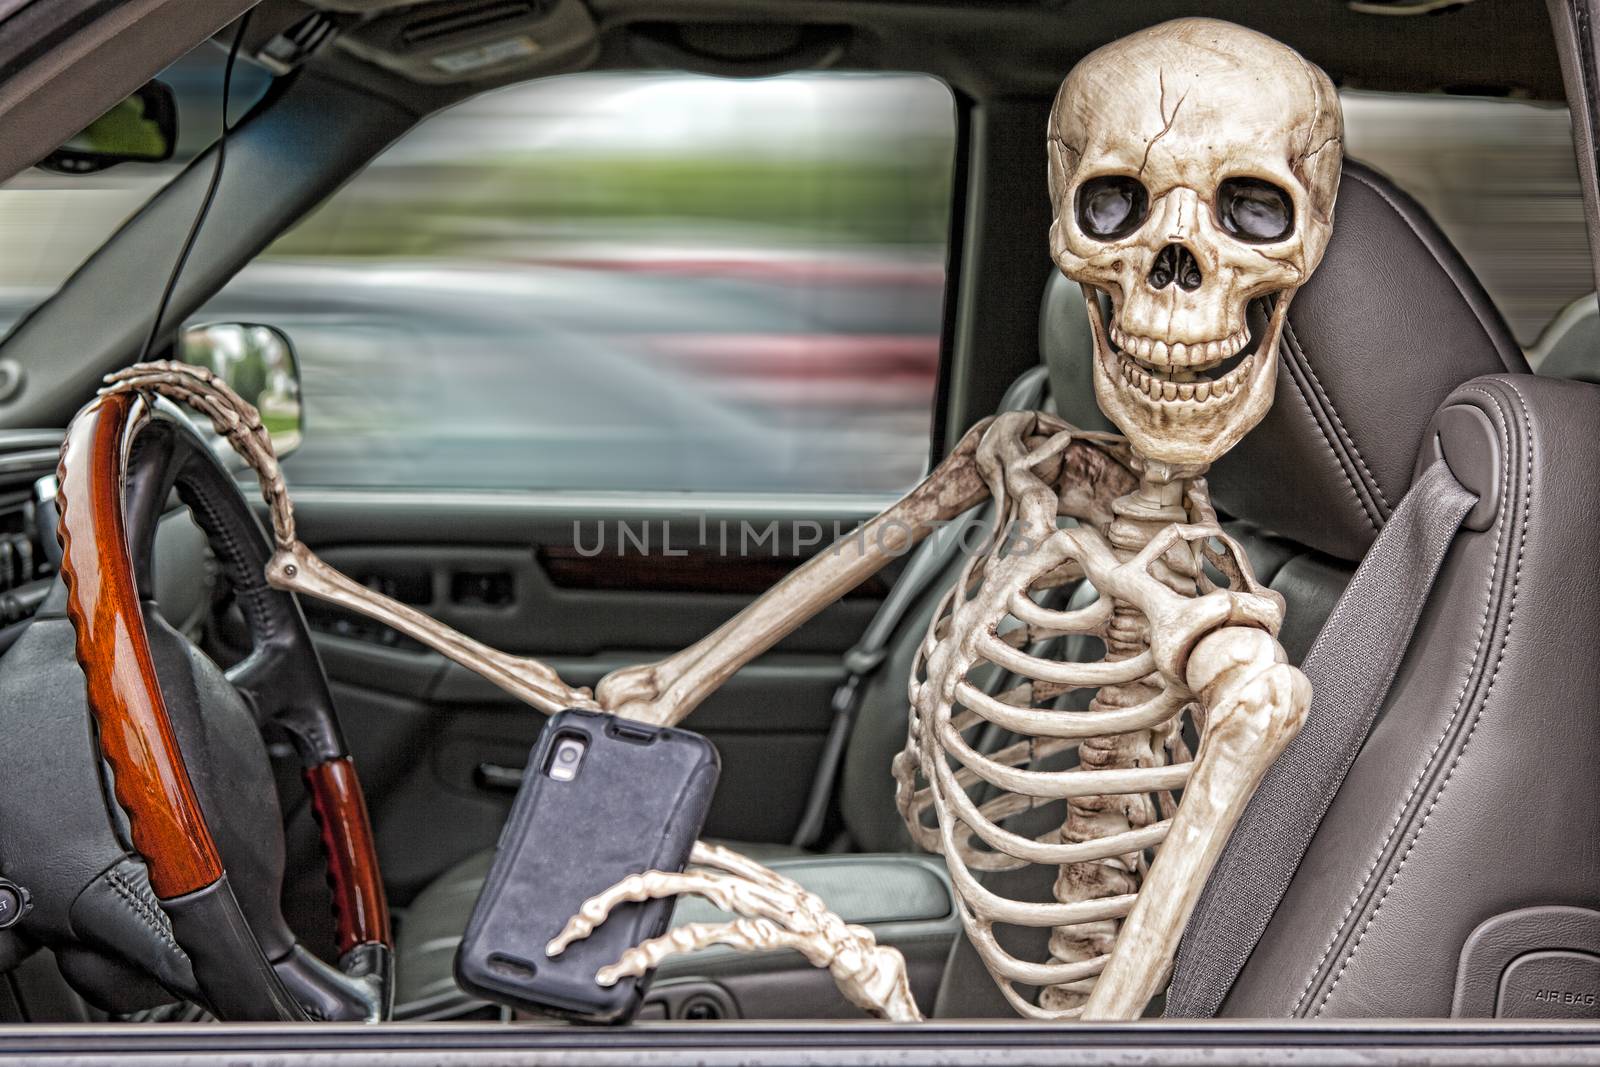 Skeleton Texting and Driving by songbird839